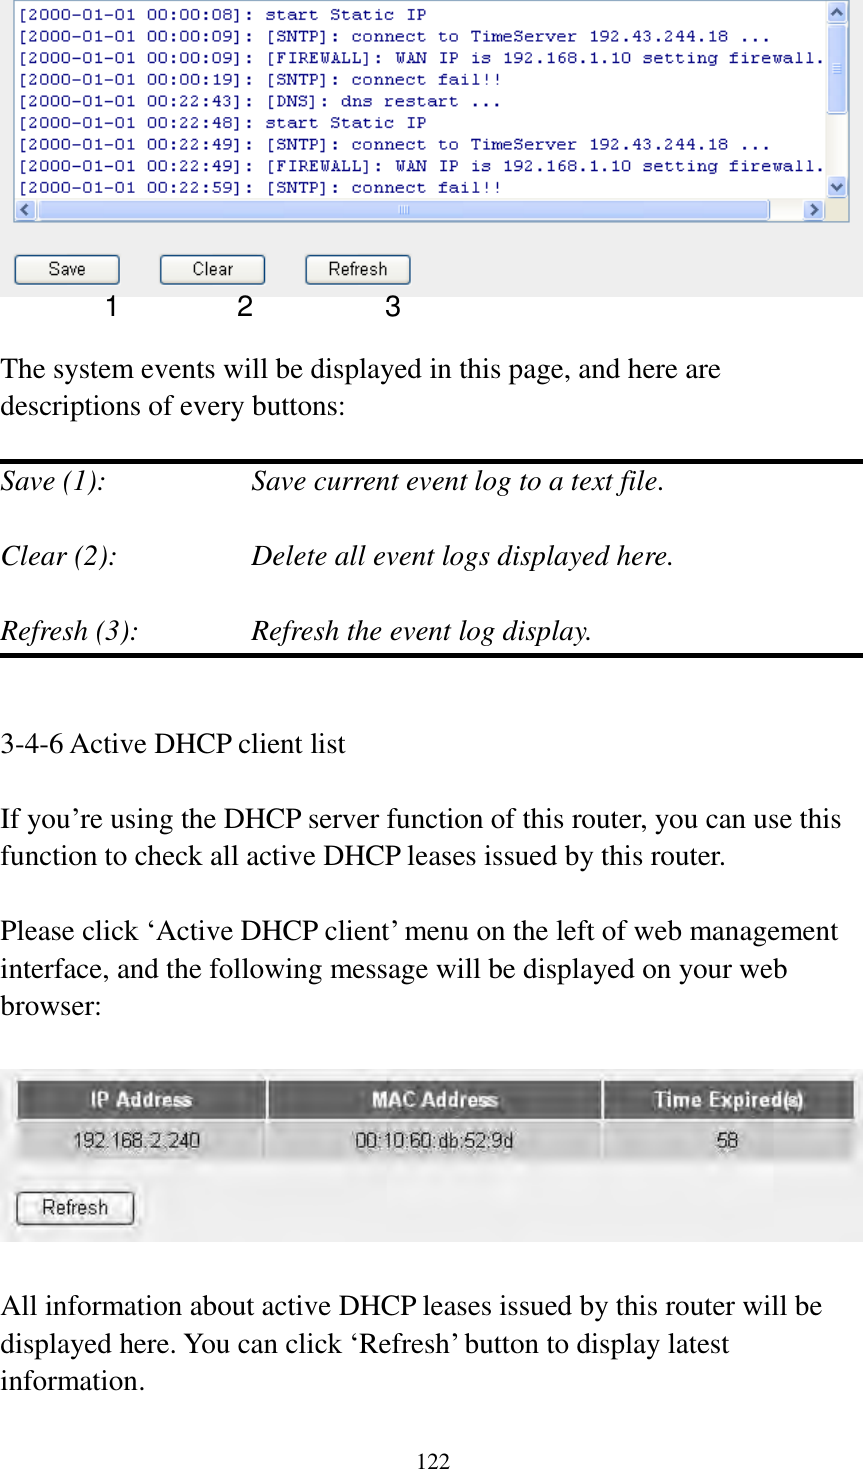 122   The system events will be displayed in this page, and here are descriptions of every buttons:  Save (1):        Save current event log to a text file.  Clear (2):        Delete all event logs displayed here.  Refresh (3):      Refresh the event log display.   3-4-6 Active DHCP client list  If you‟re using the DHCP server function of this router, you can use this function to check all active DHCP leases issued by this router.  Please click „Active DHCP client‟ menu on the left of web management interface, and the following message will be displayed on your web browser:    All information about active DHCP leases issued by this router will be displayed here. You can click „Refresh‟ button to display latest information. 1 2 3 